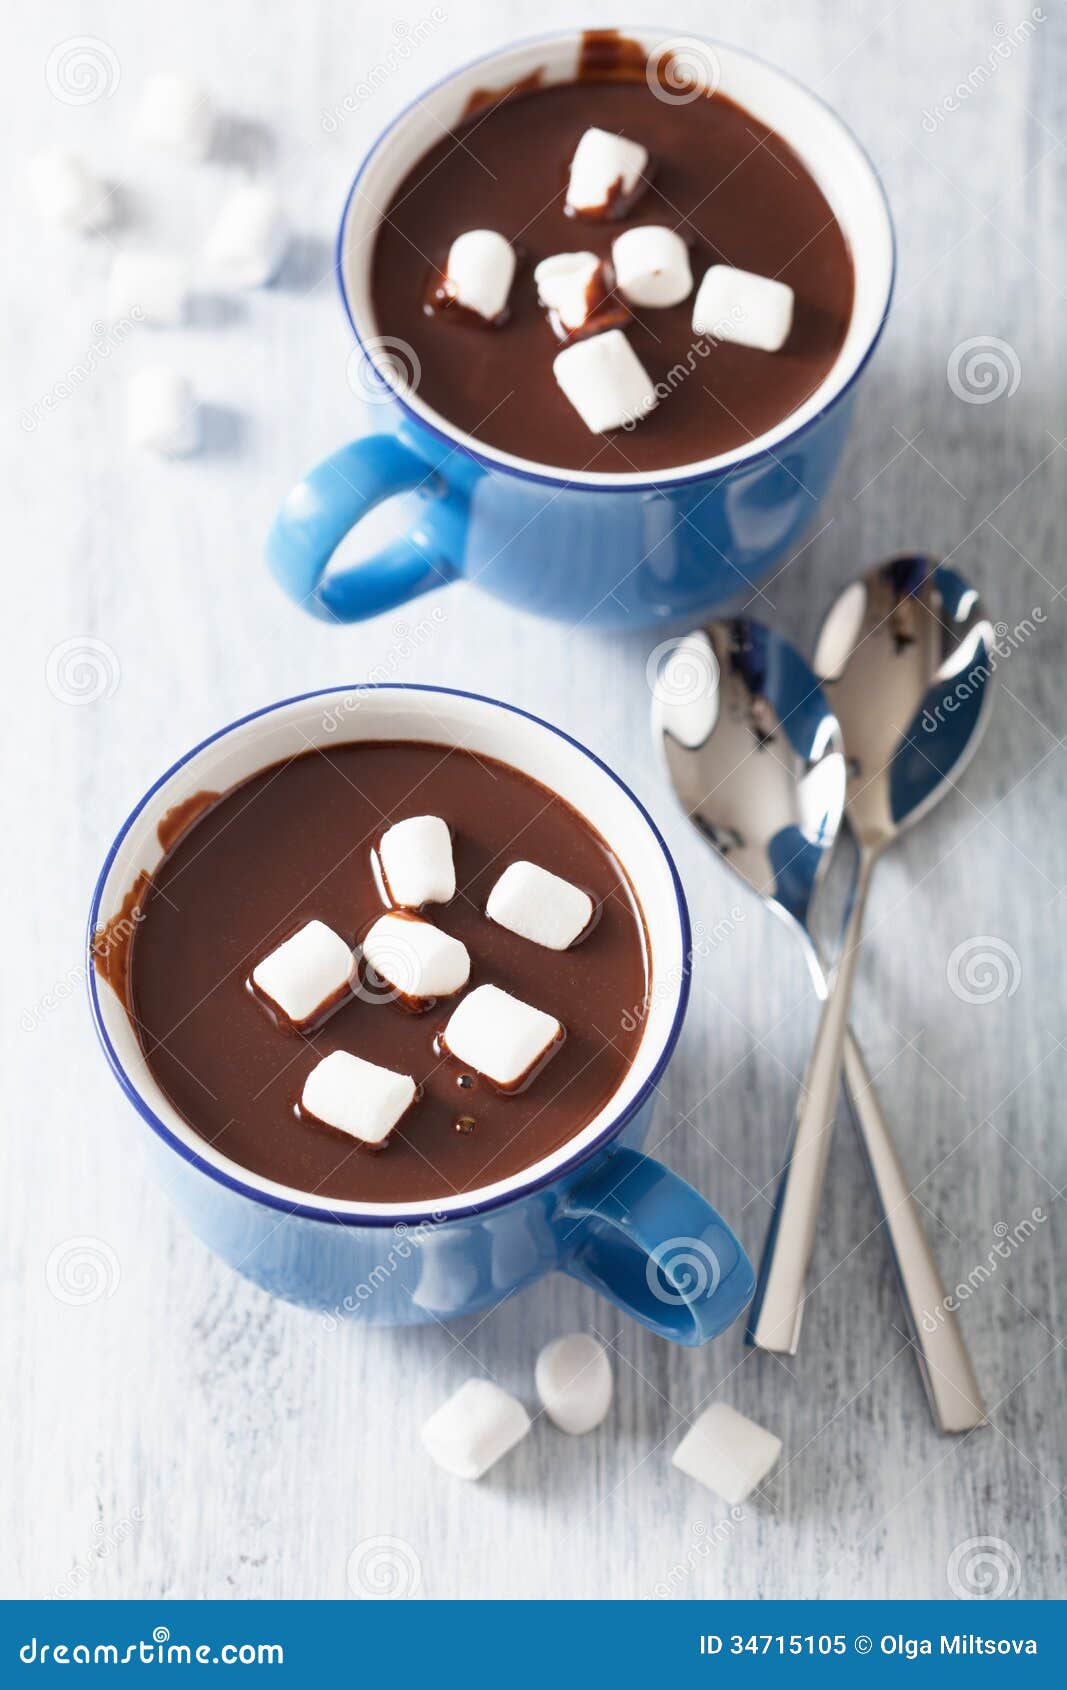 Hot Chocolate with Small Marshmallows Stock Image - Image of cacao ...